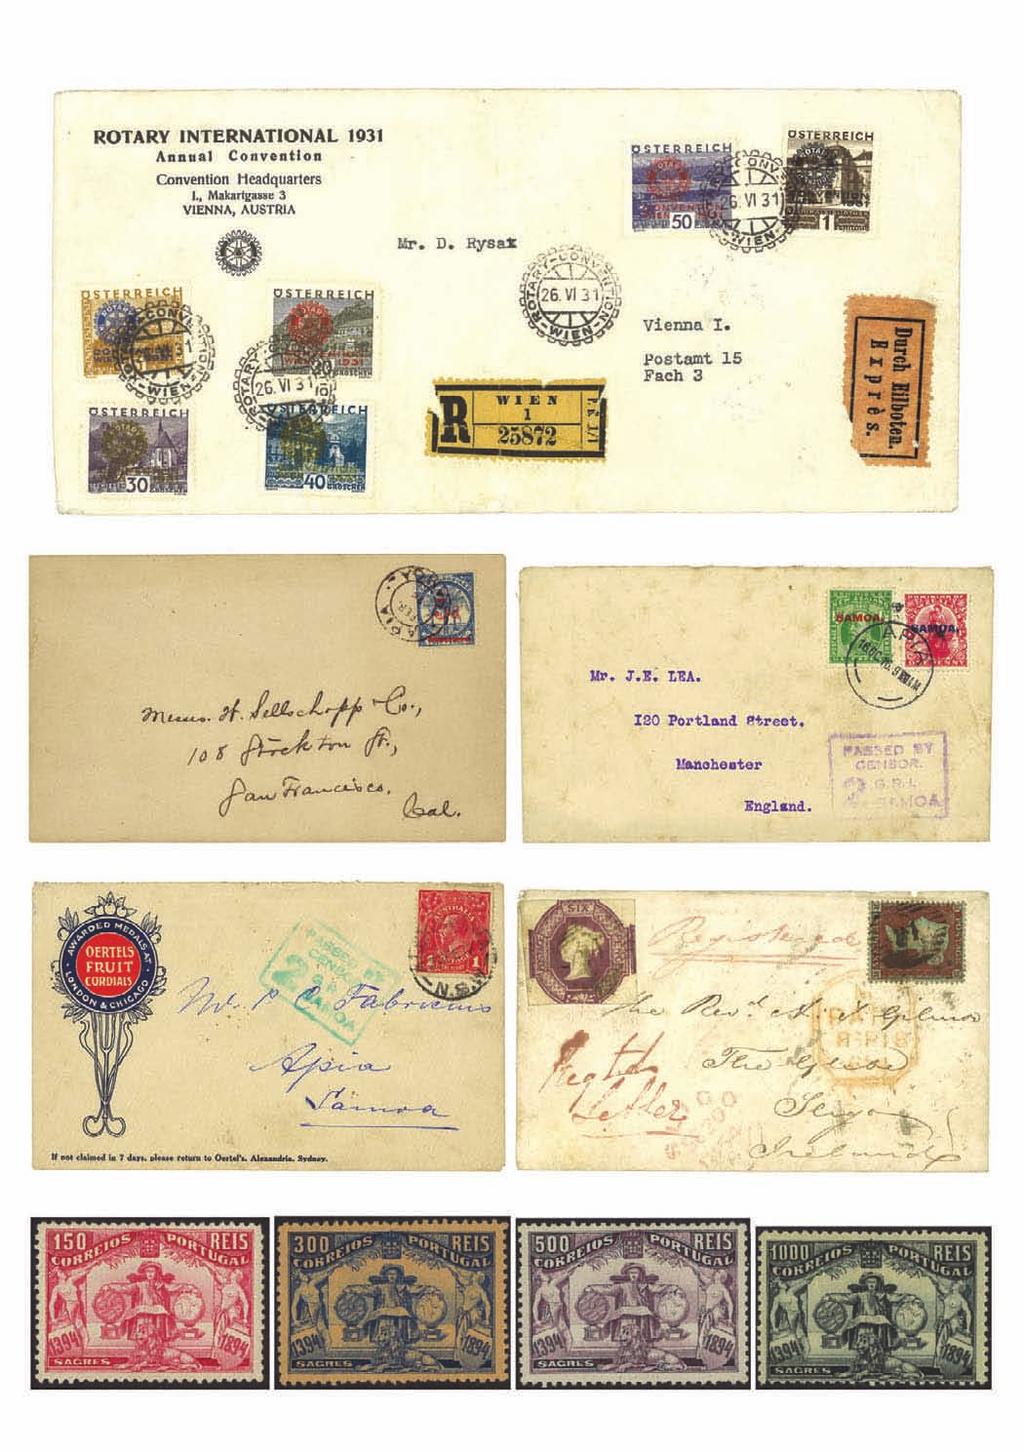 All envelope images reduced in size